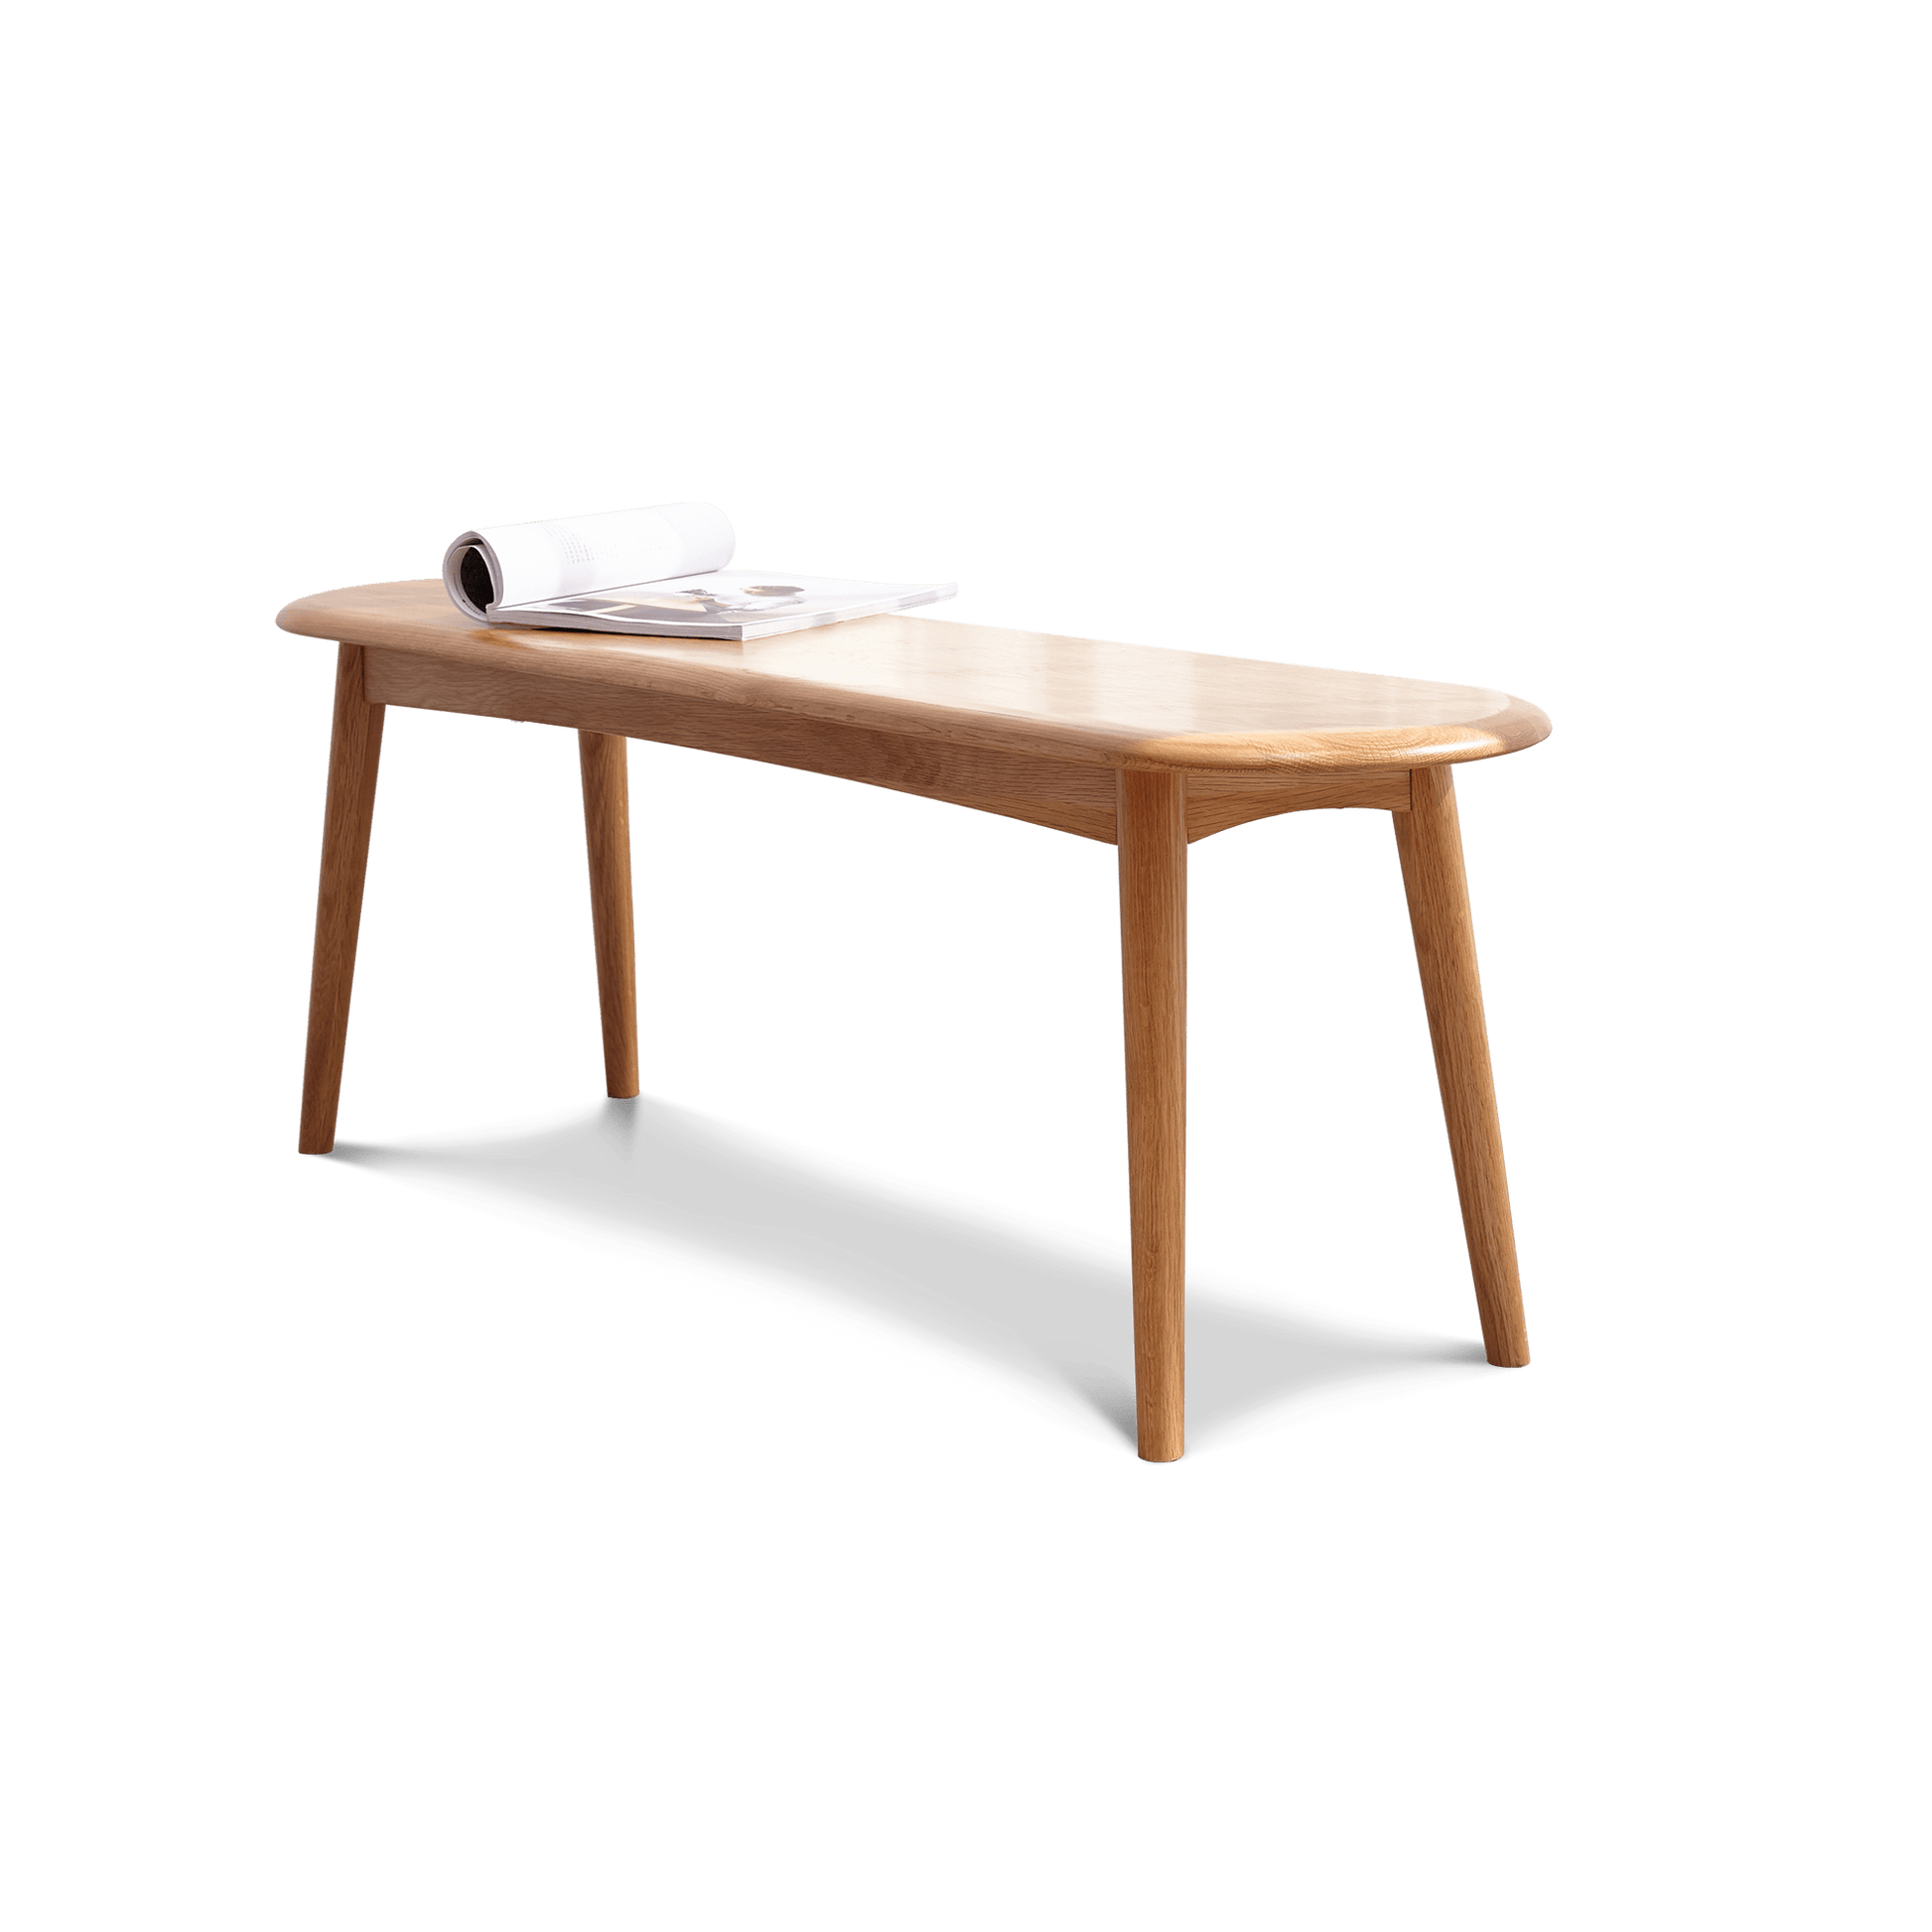 1st Choice Furniture Direct 1st Choice Oak Wood Dining Table Bench - Walnut Finish, 47.2 Inch Length